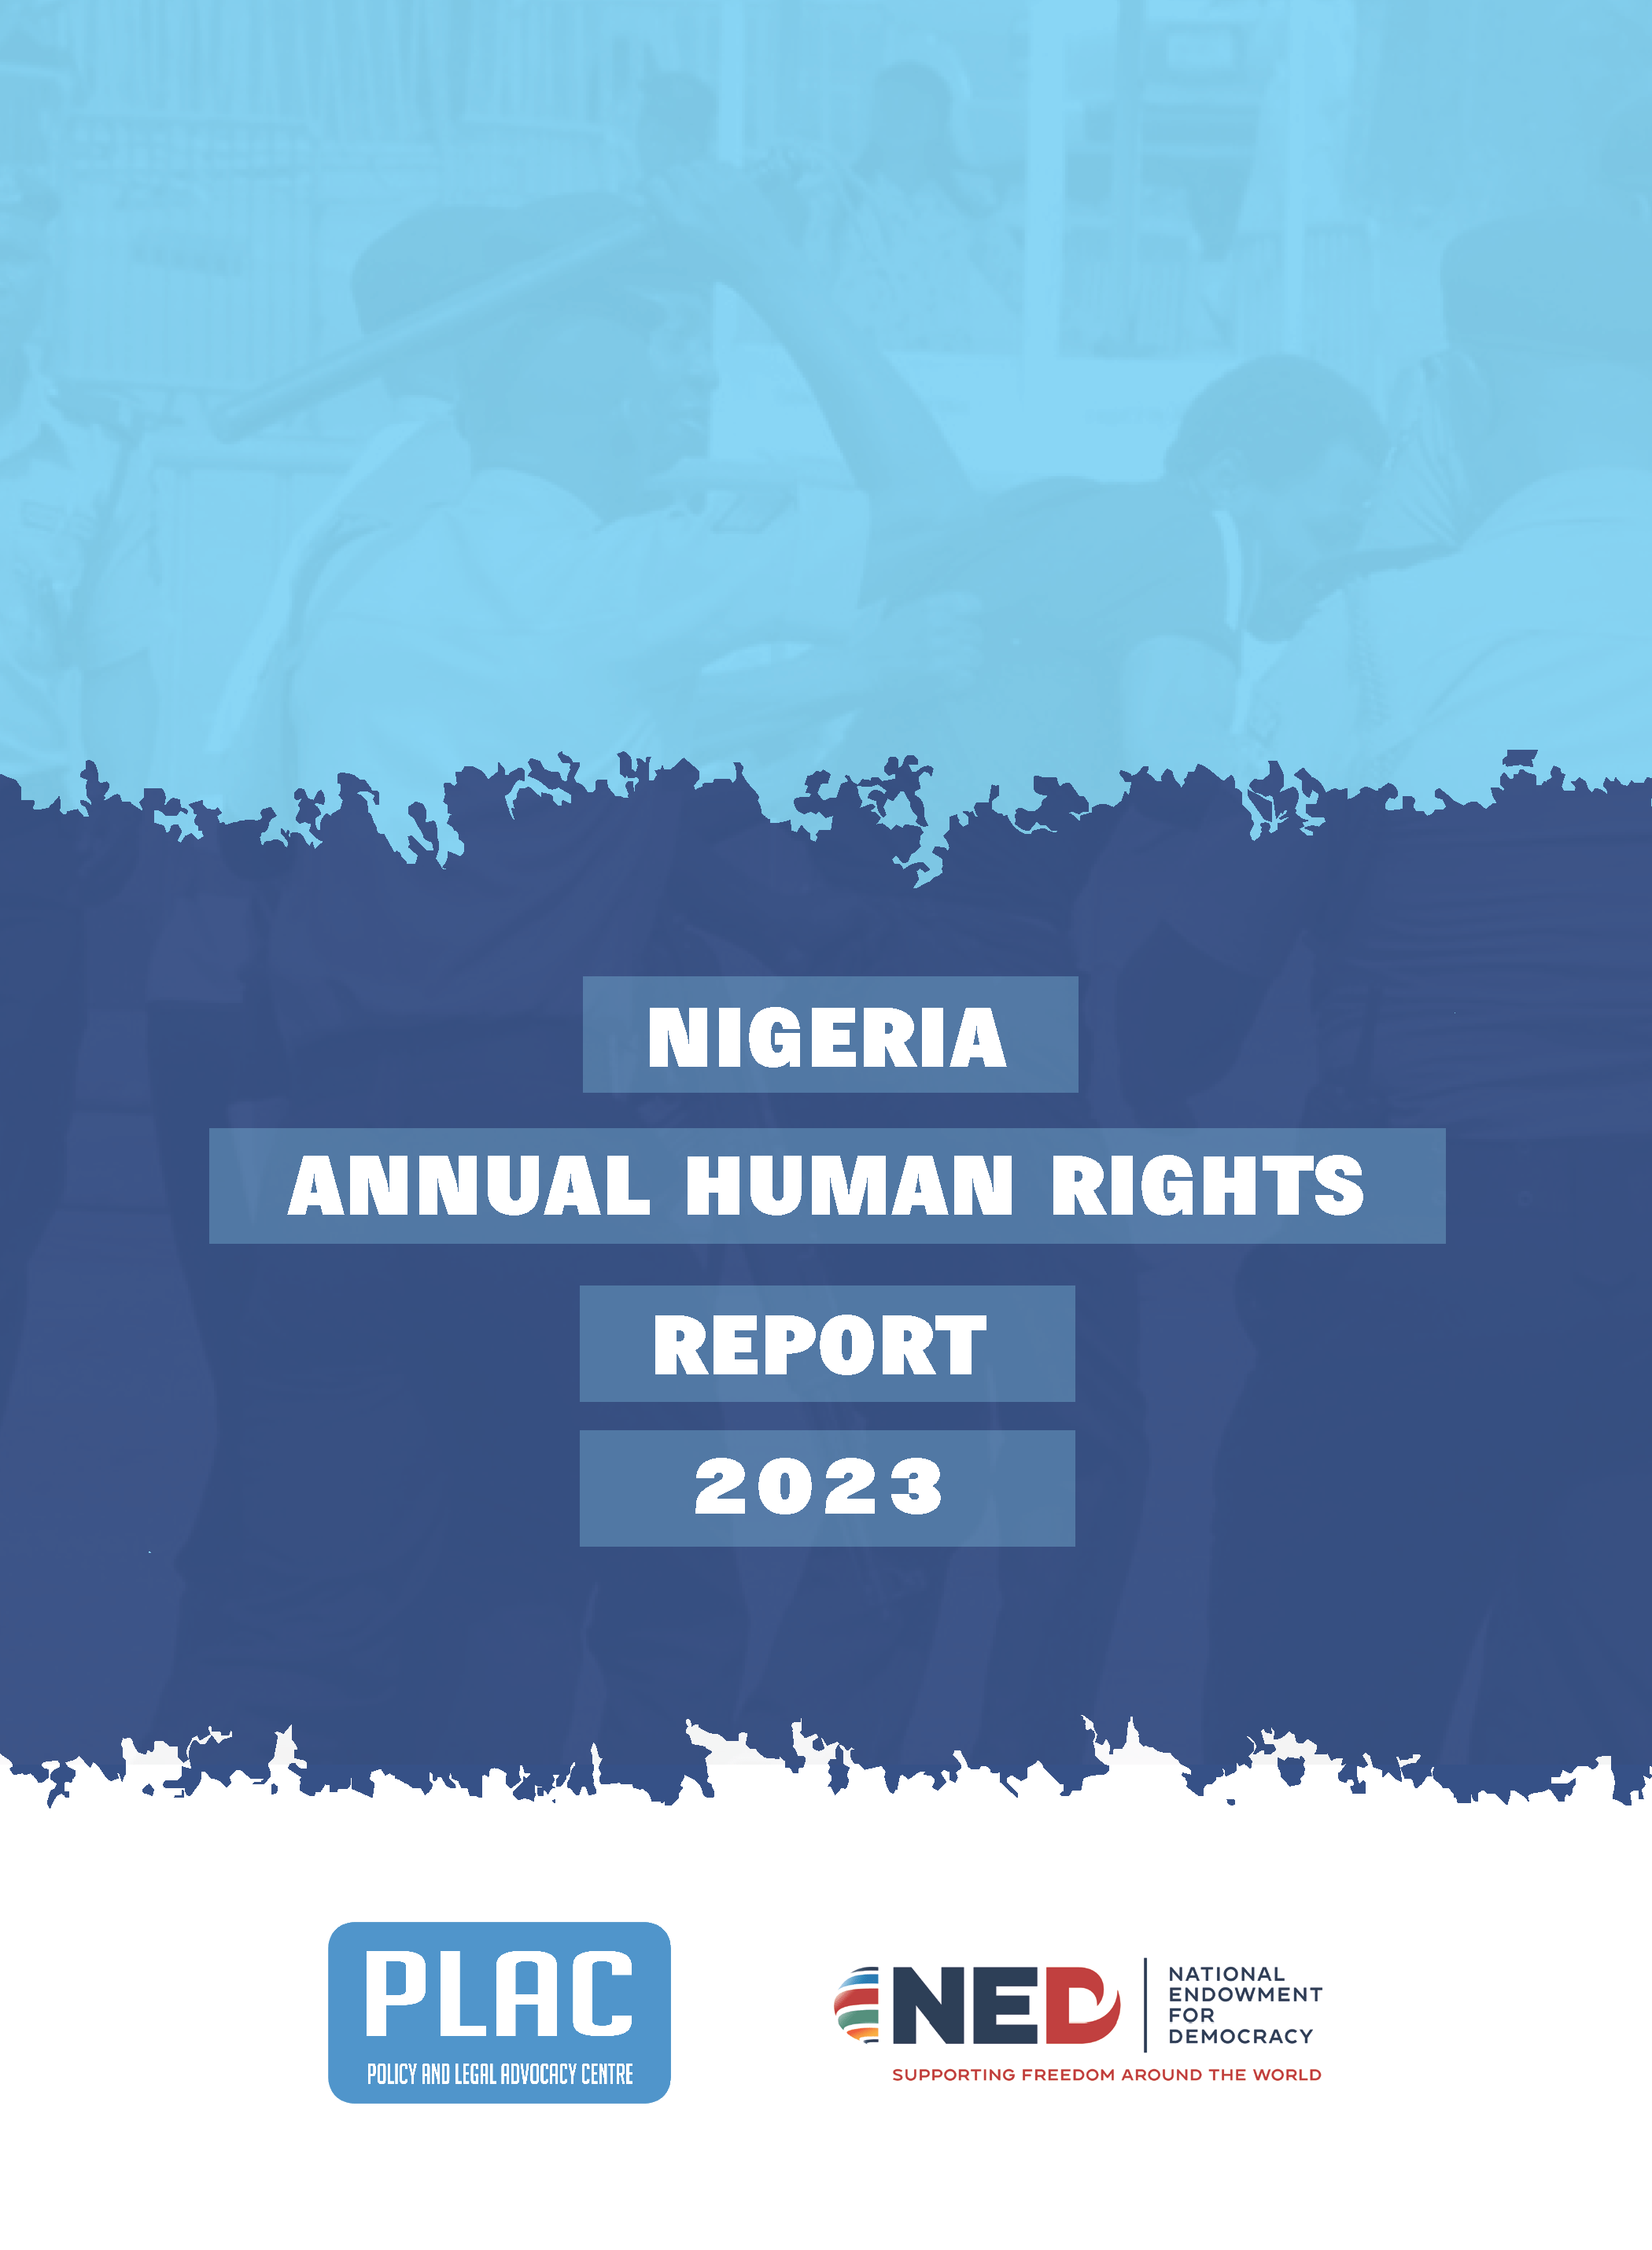 Annual Human Rights Report 2023